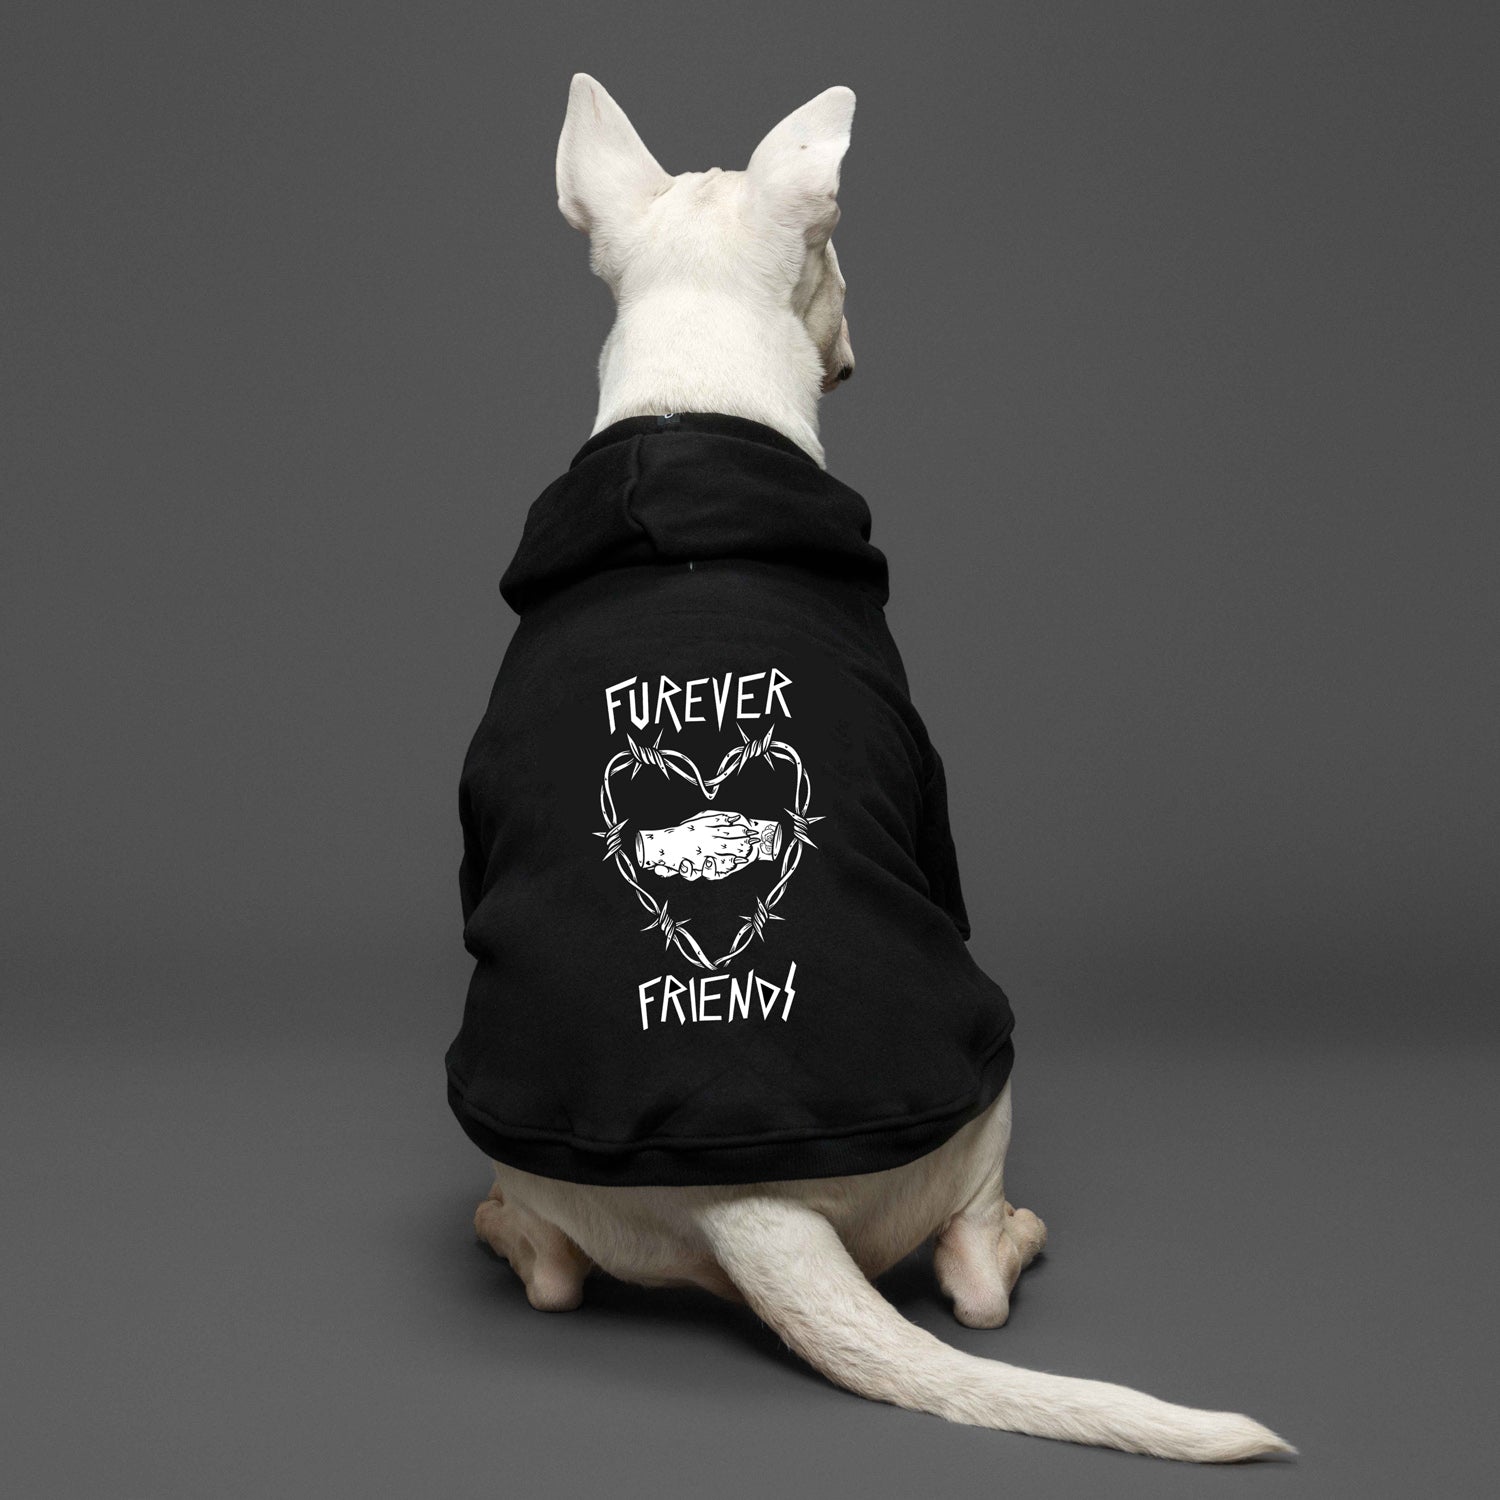 cool dog hoodie for rescue dog, furever friends dog hoodie gift for dog lovers